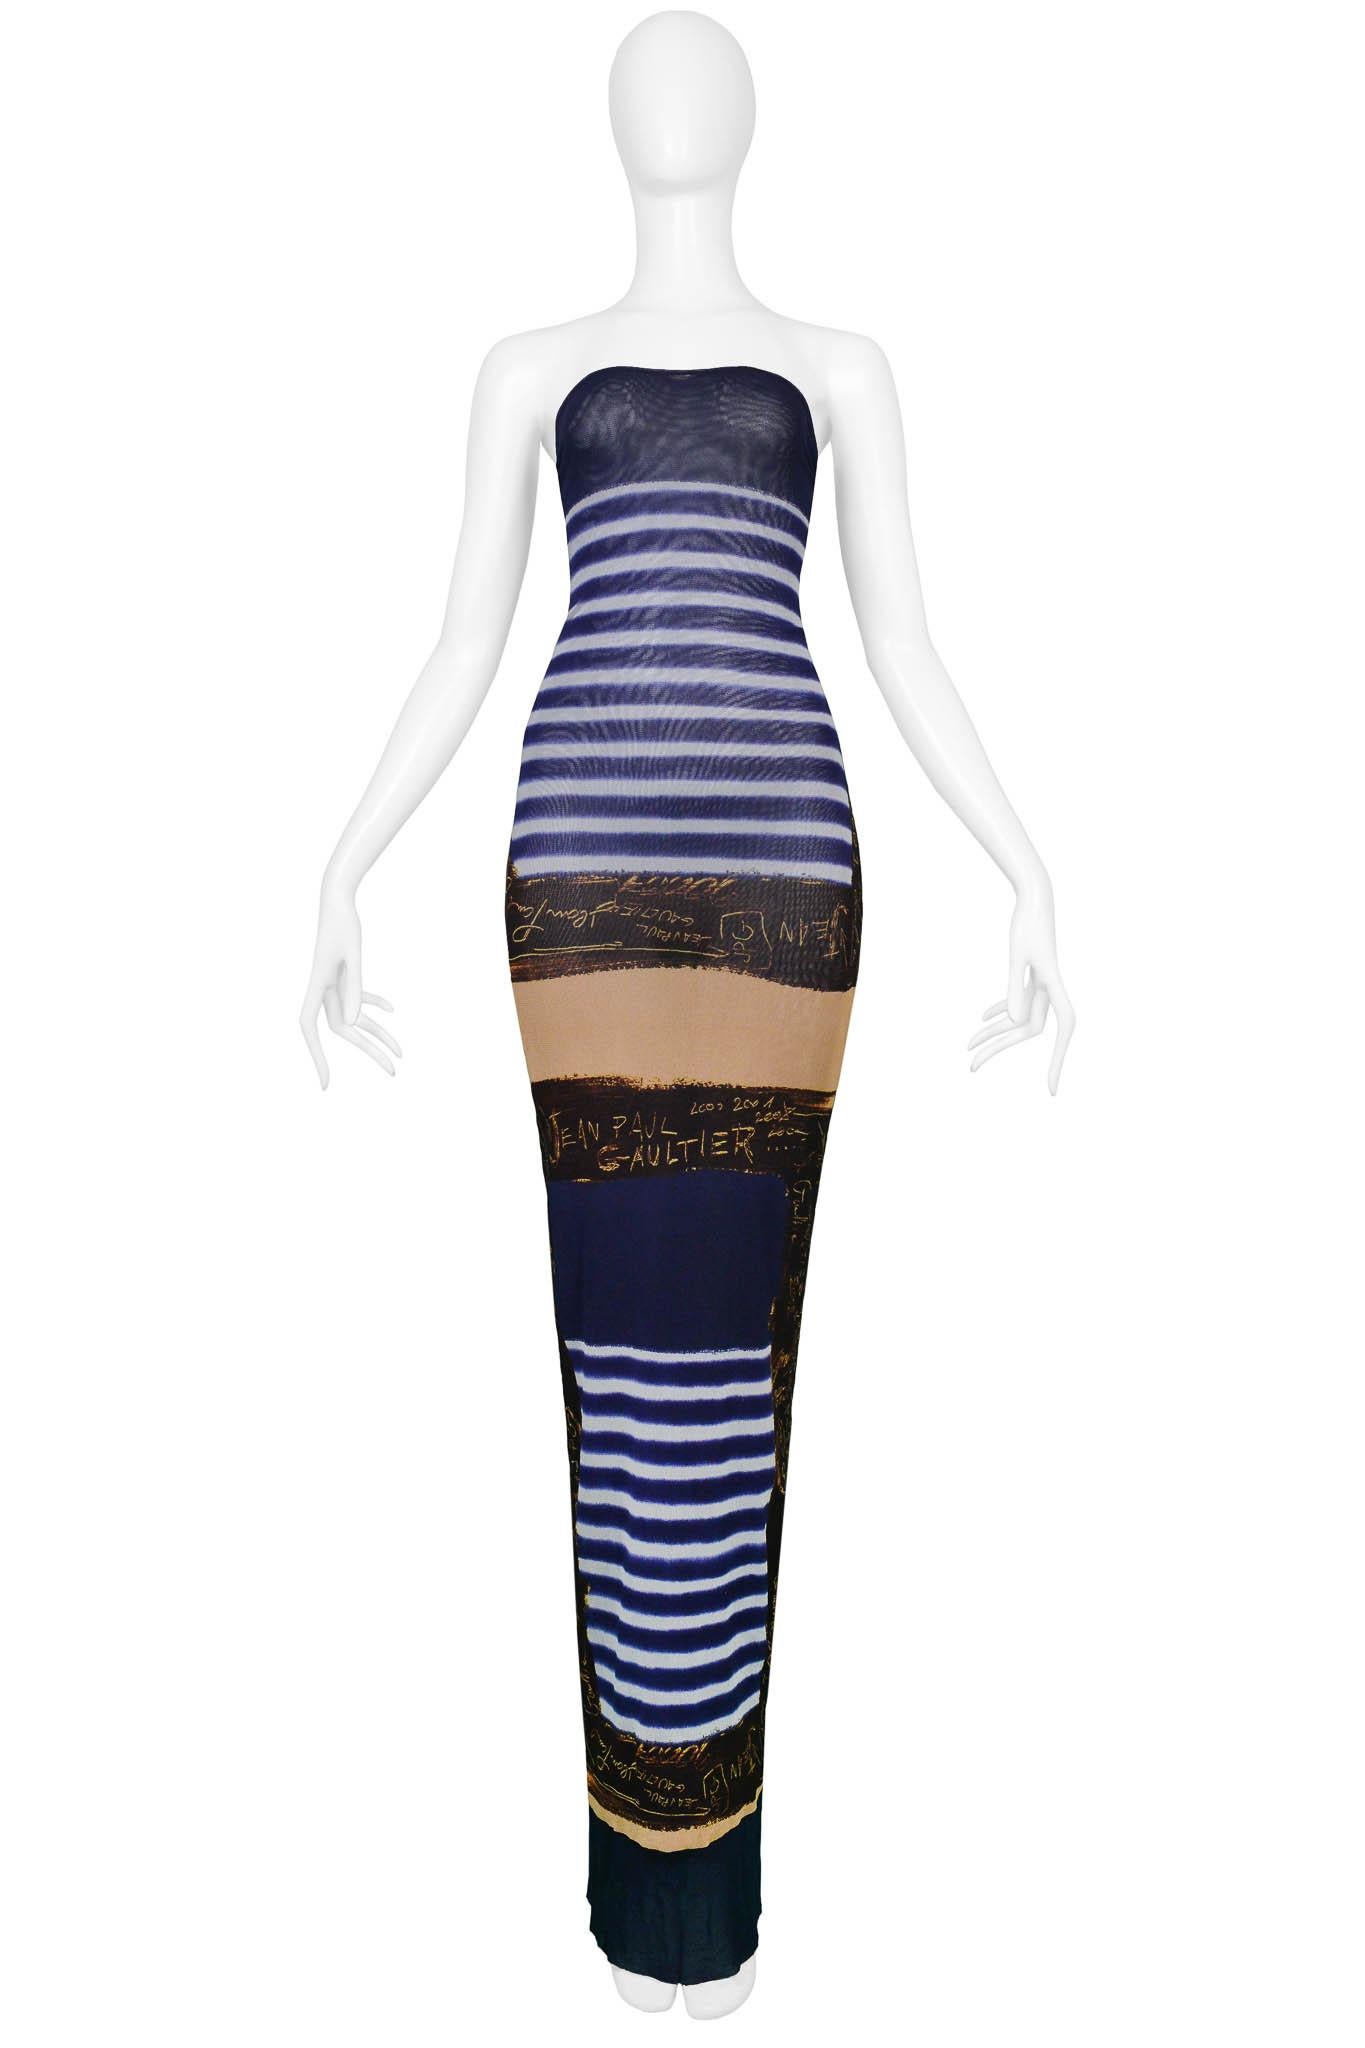 Resurrection Vintage is excited to offer a vintage Jean Paul Gaultier strapless dress featuring iconic French nautical stripes, signature print, mesh fabric, and body-con fit. From the 2001 collection. 

Jean Paul Gaultier
Size M
Nylon 
Collection